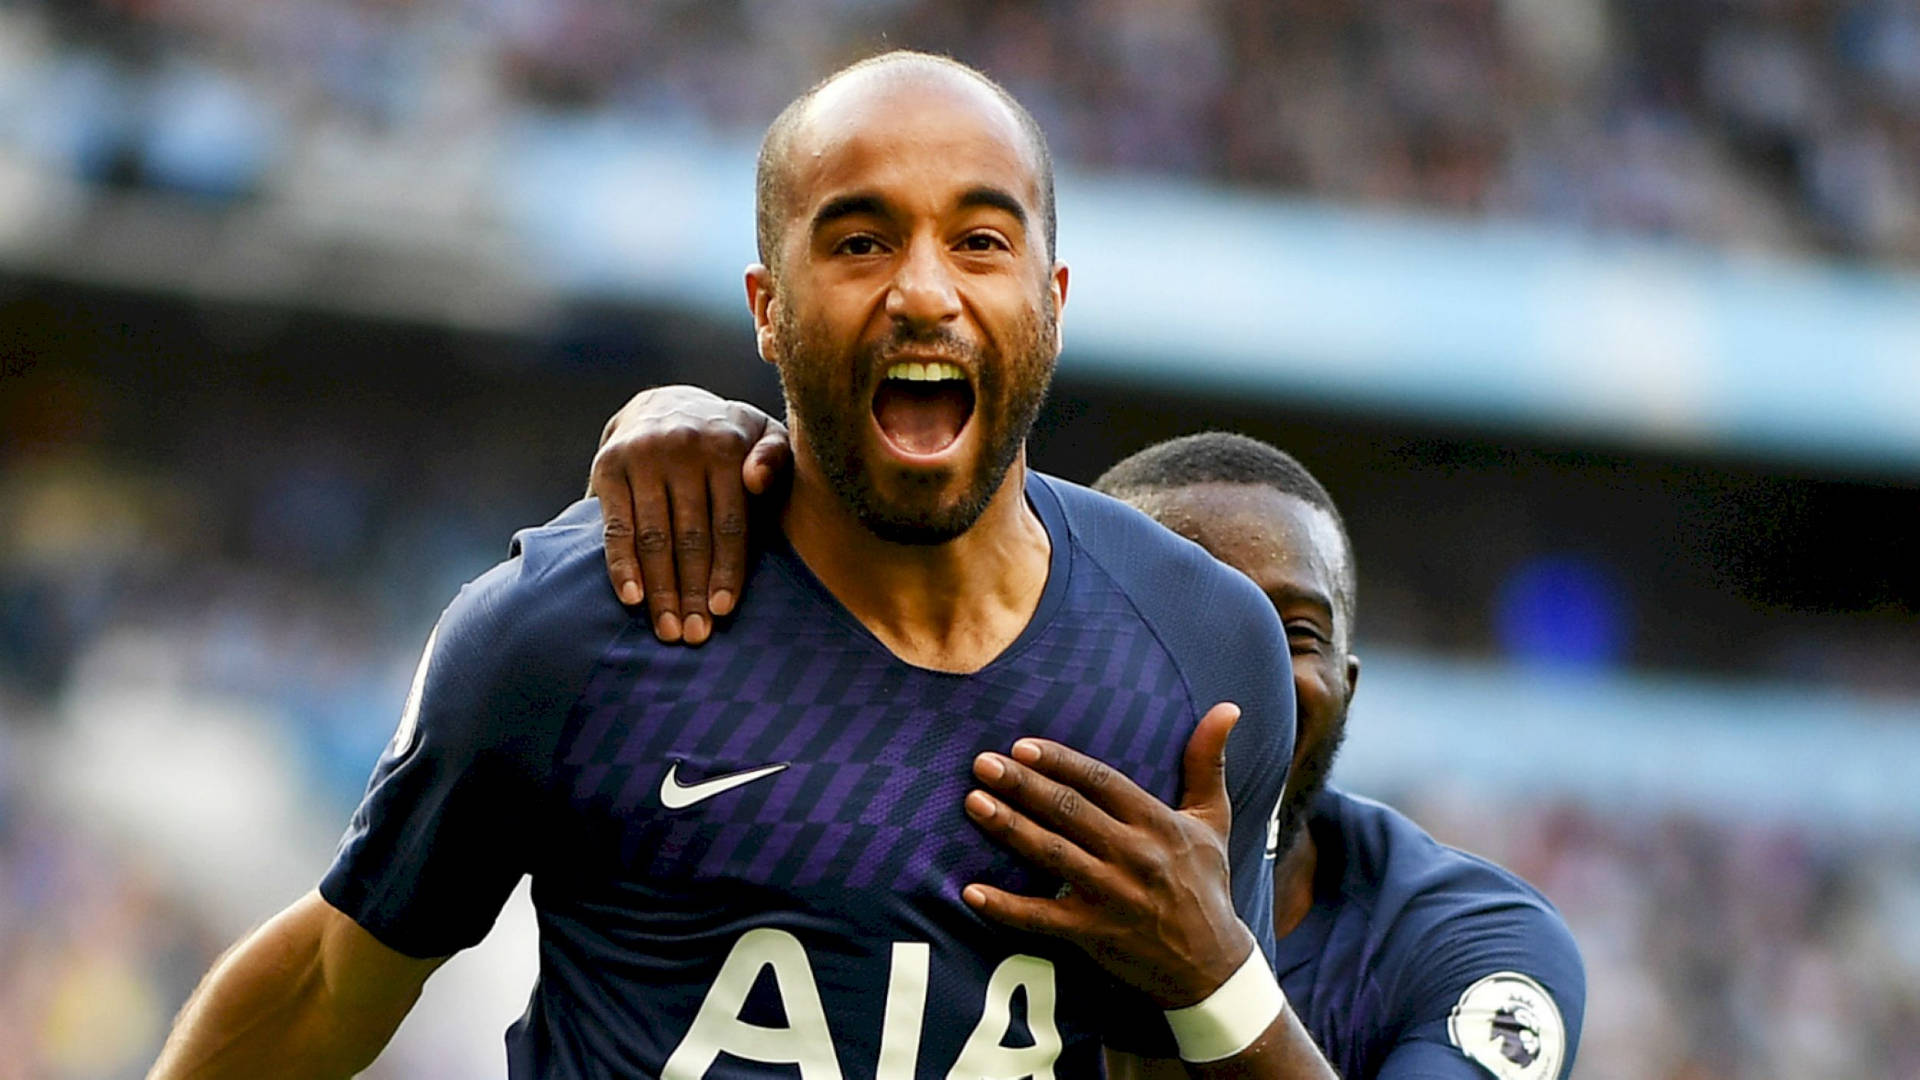 Lucas Moura Yelling With Teammate Wallpaper